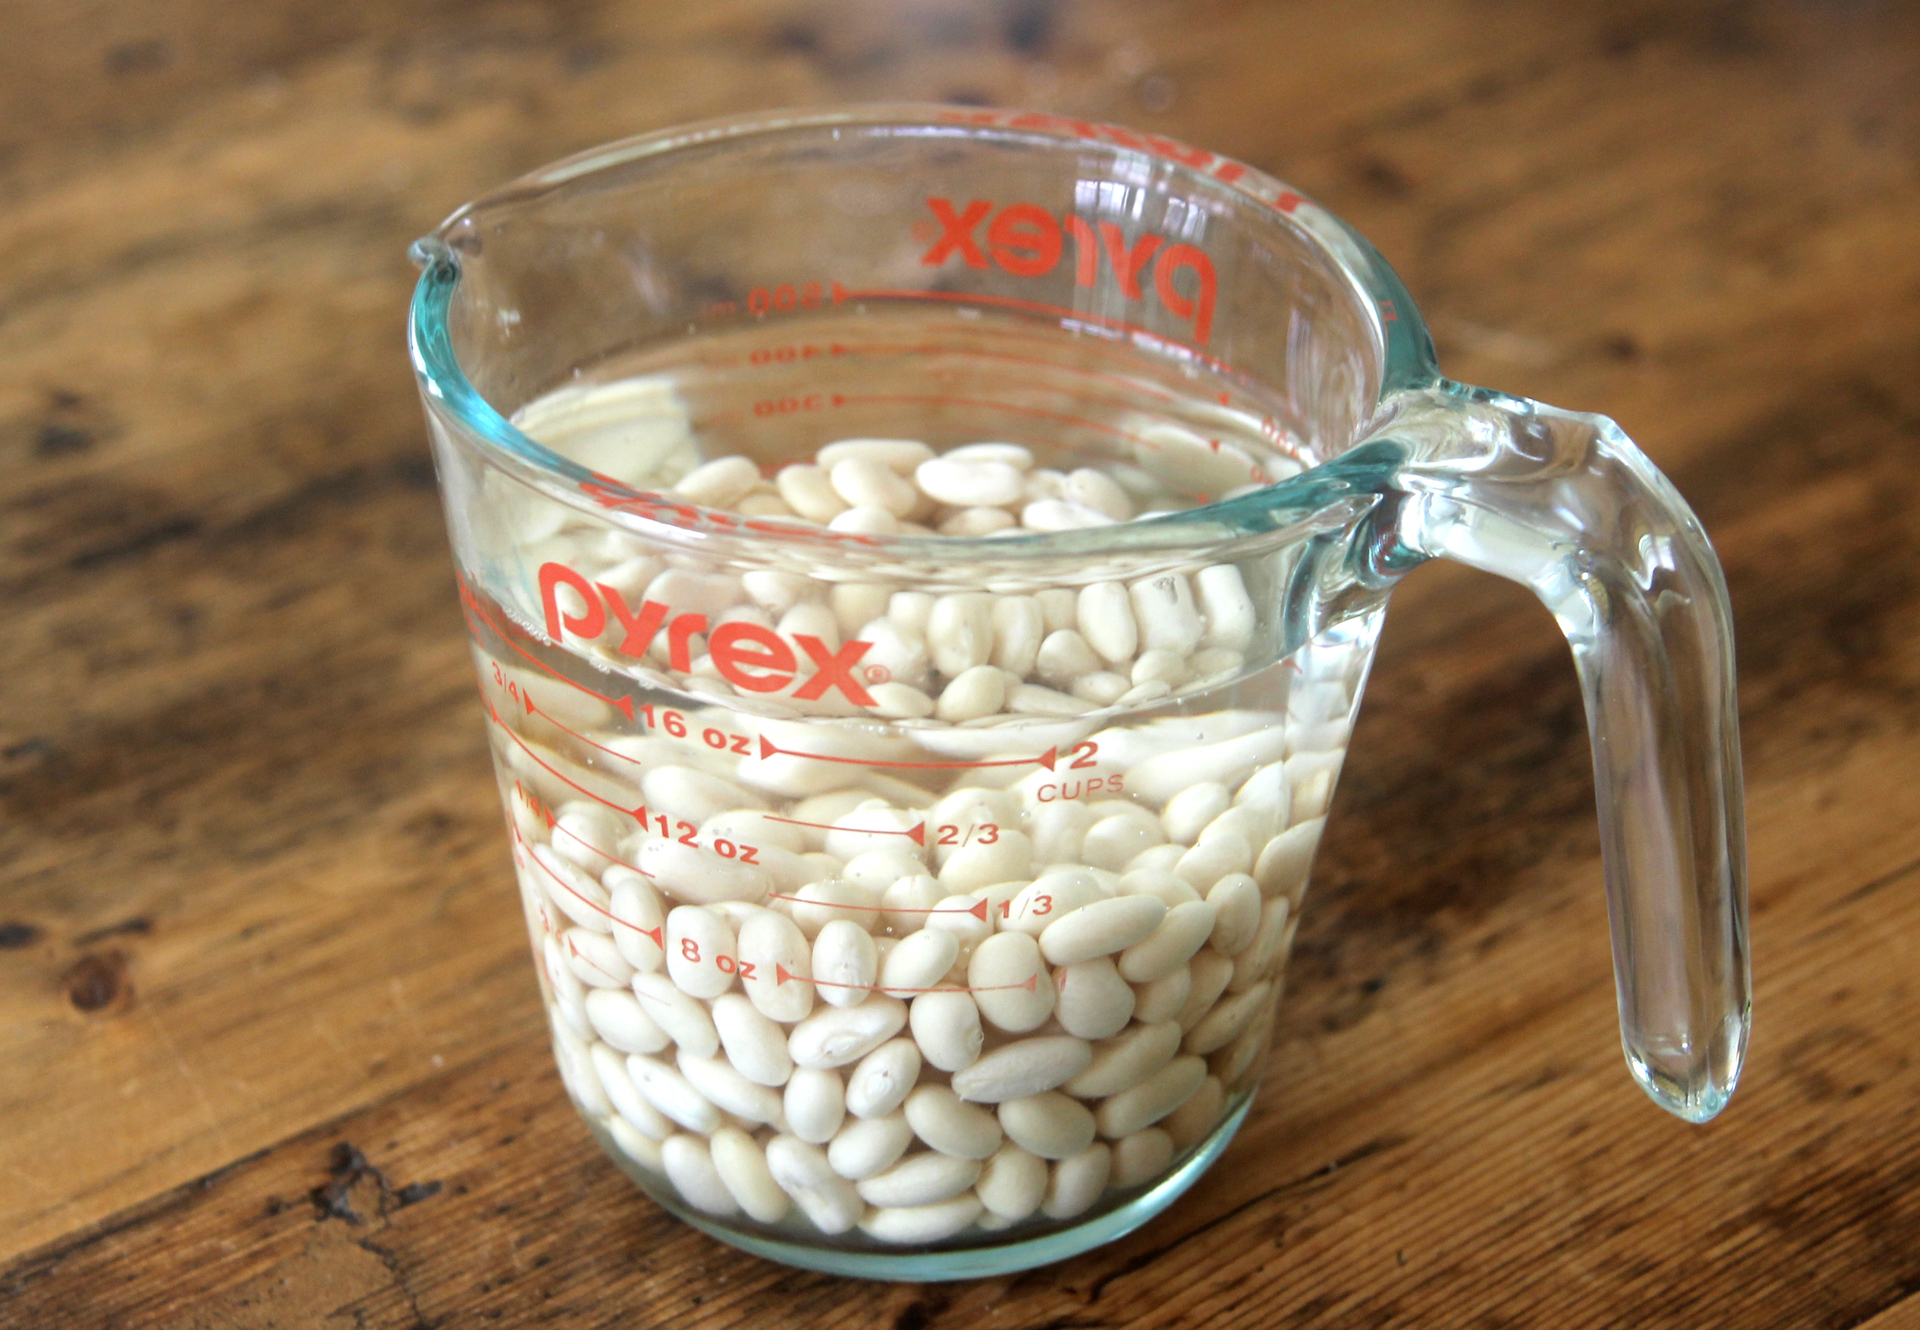 First, soak your bean of choice in cool water overnight.